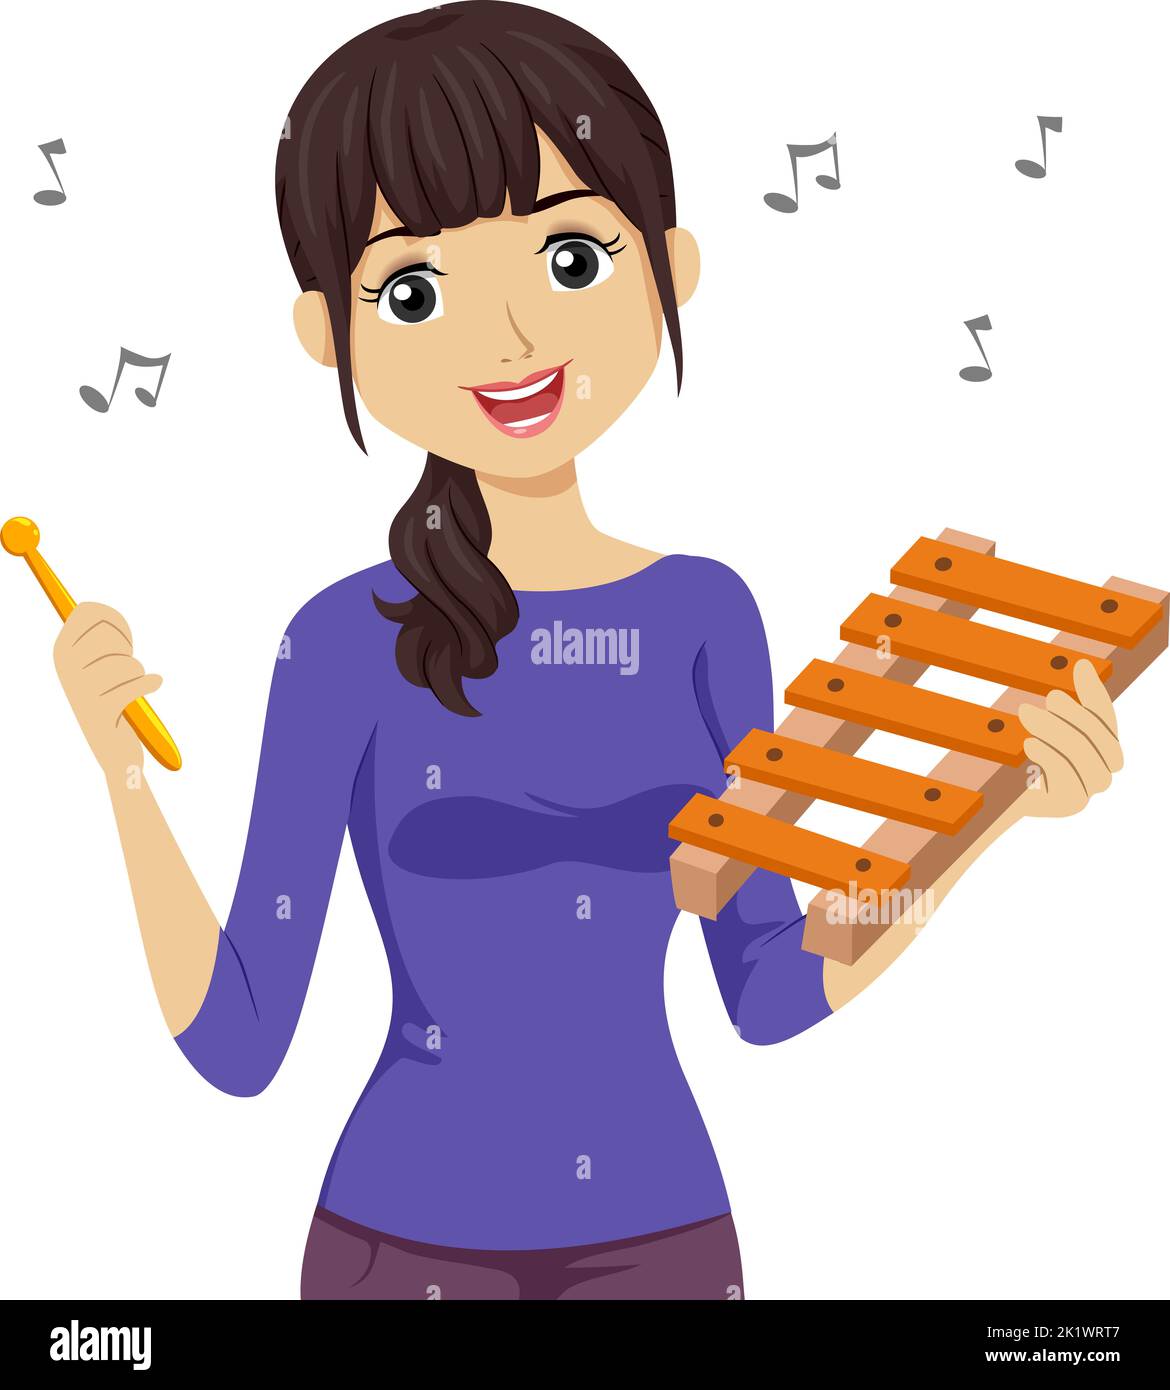 Illustration of Teen Girl Playing Xylophone Instrument with Musical Notes Floating Around Stock Photo